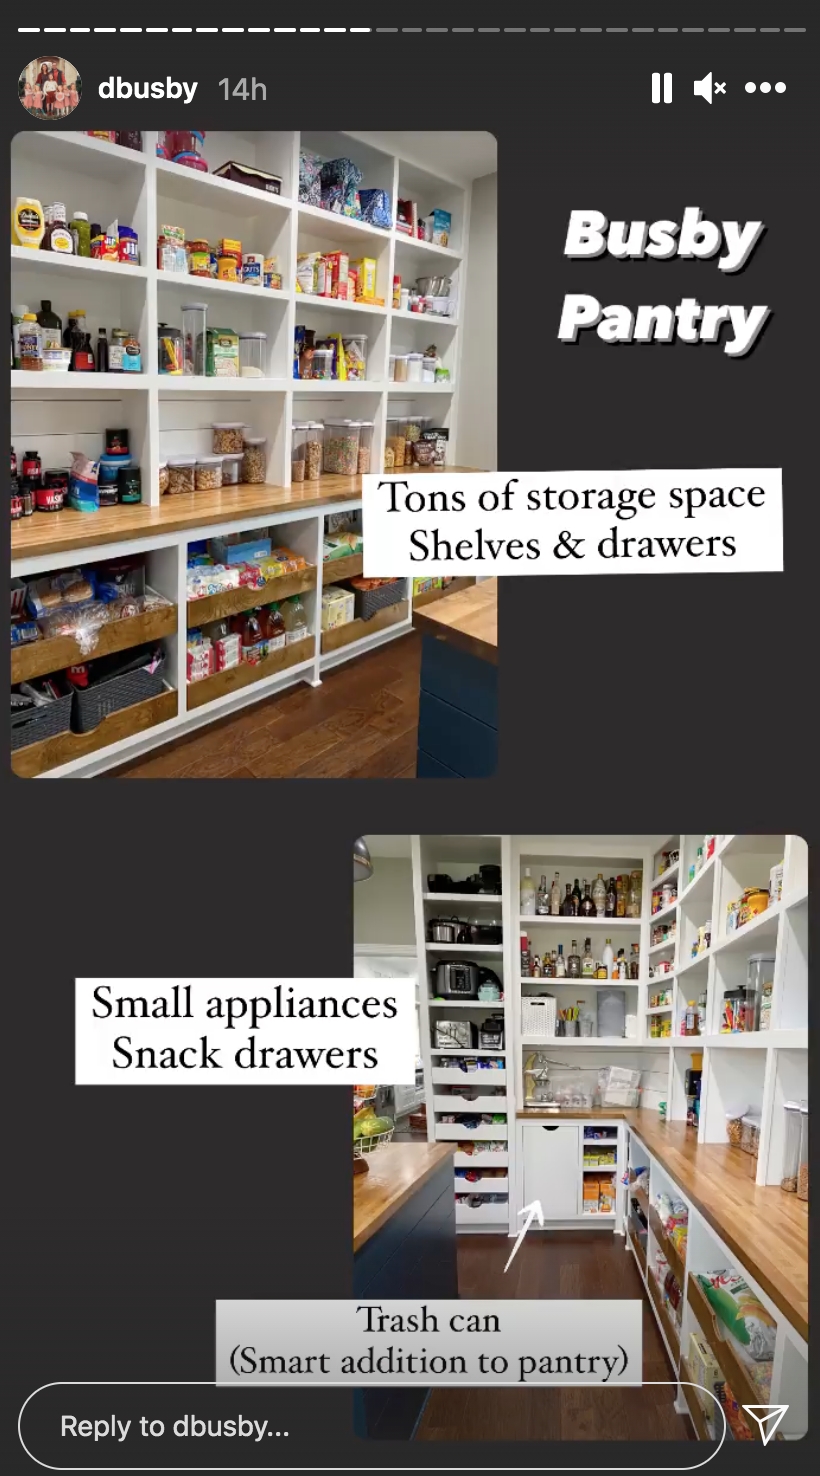 Busby Pantry